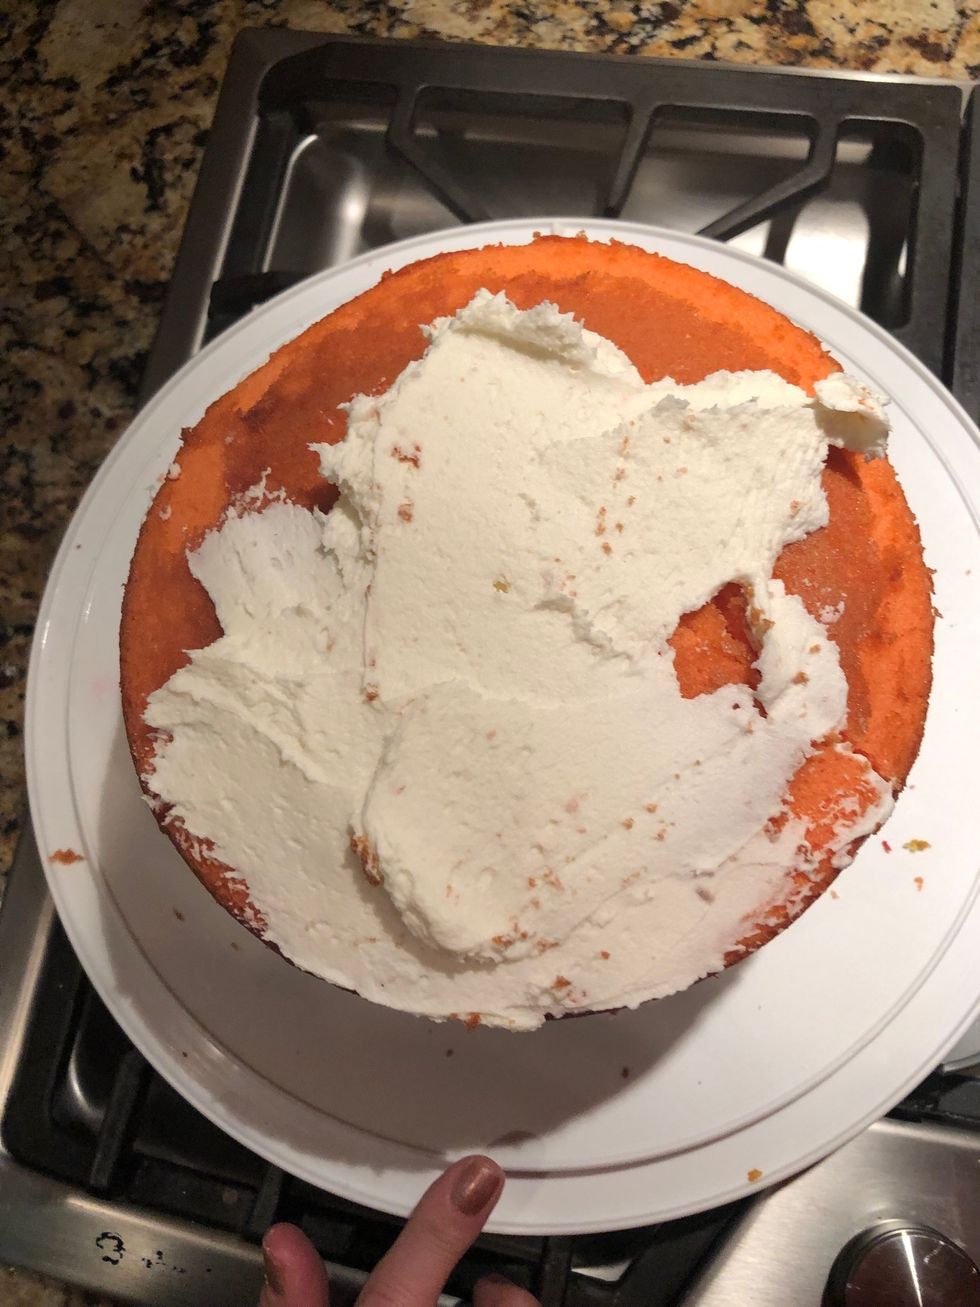 Put icing on top of the orange layer until fully covered.